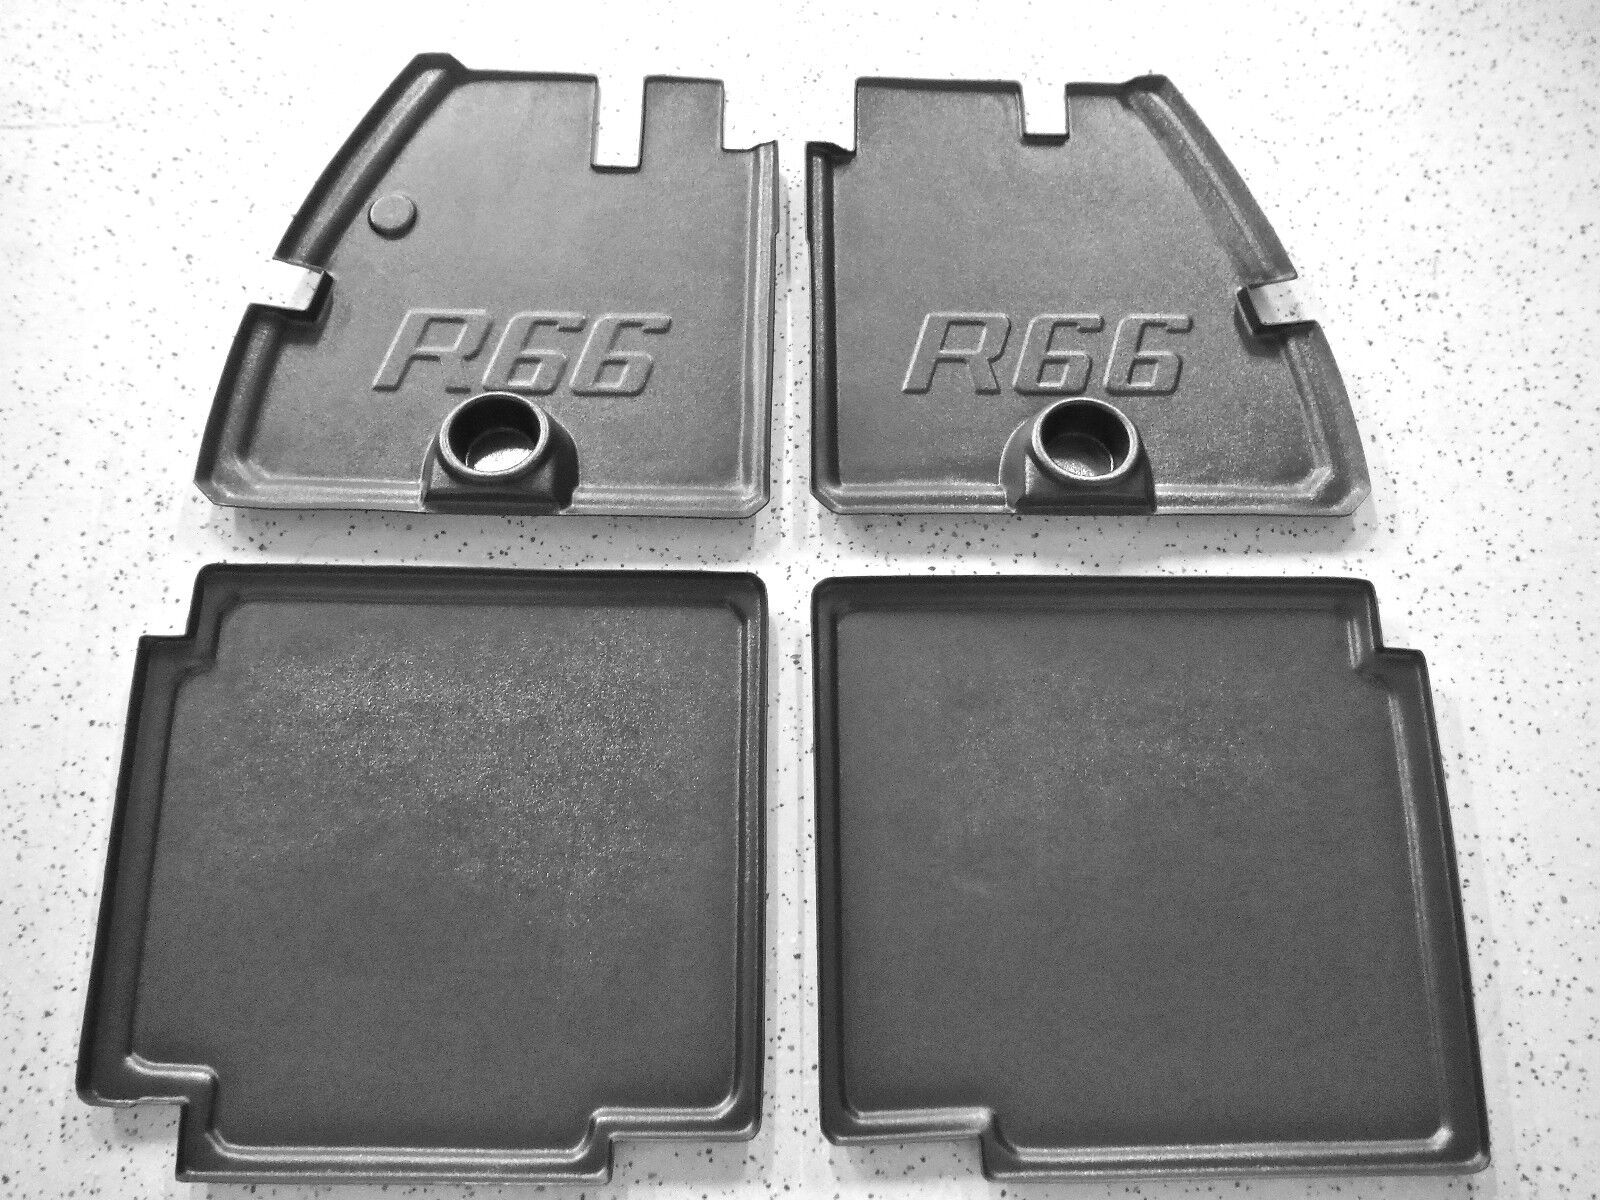 NEW Robinson R66 Helicopter floor mats trays pans part with cup holders set of 4